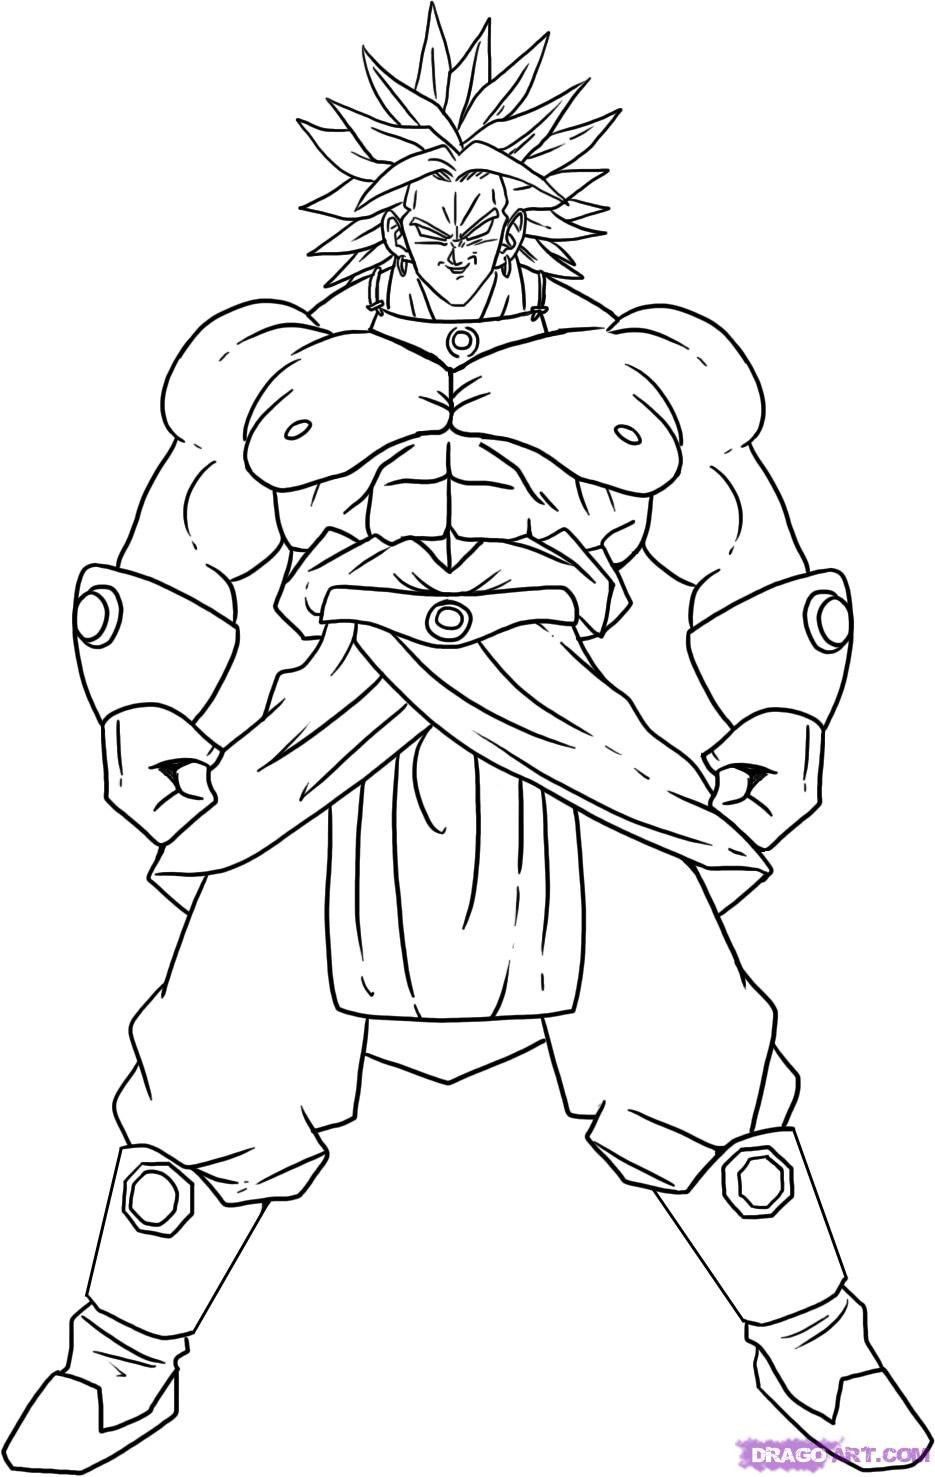 dbz colouring pages free printable dragon ball z coloring pages for kids dbz colouring pages 